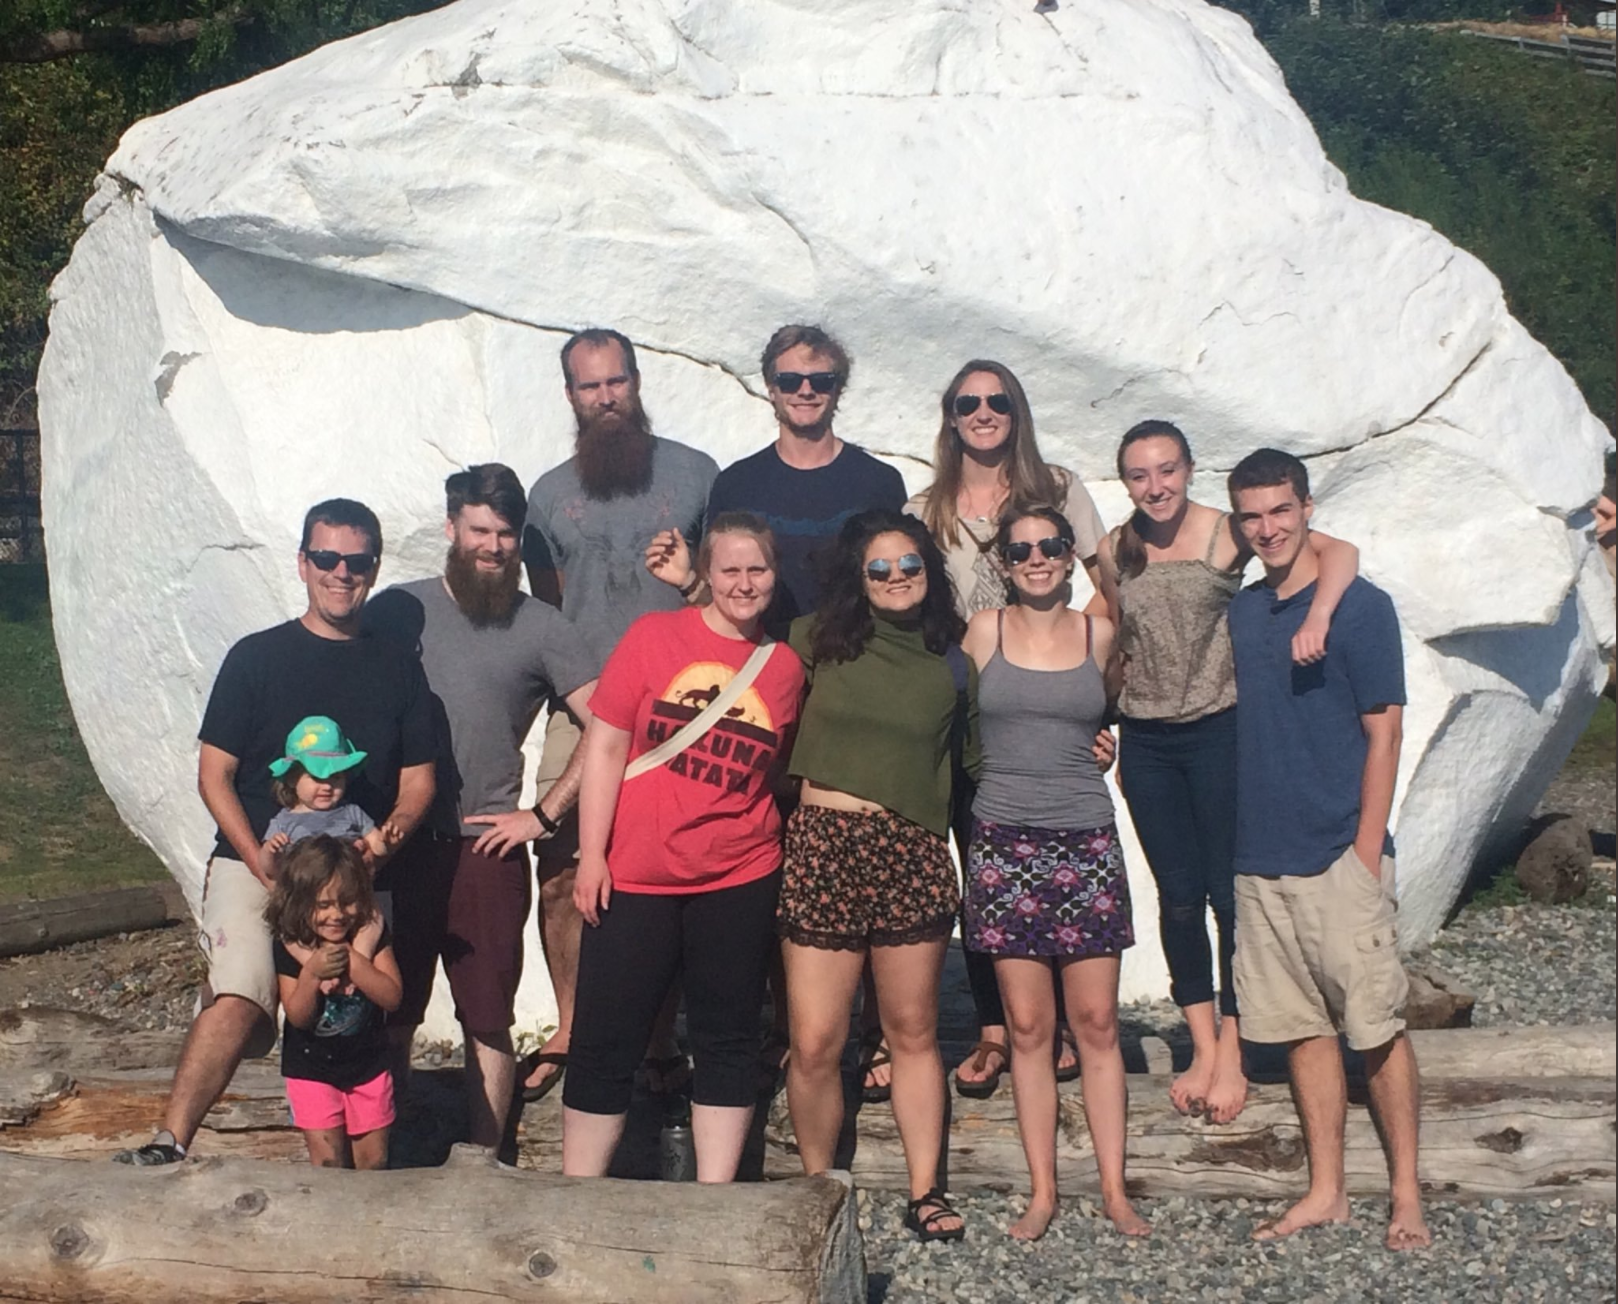 Students pose in front of a giant, white boulder